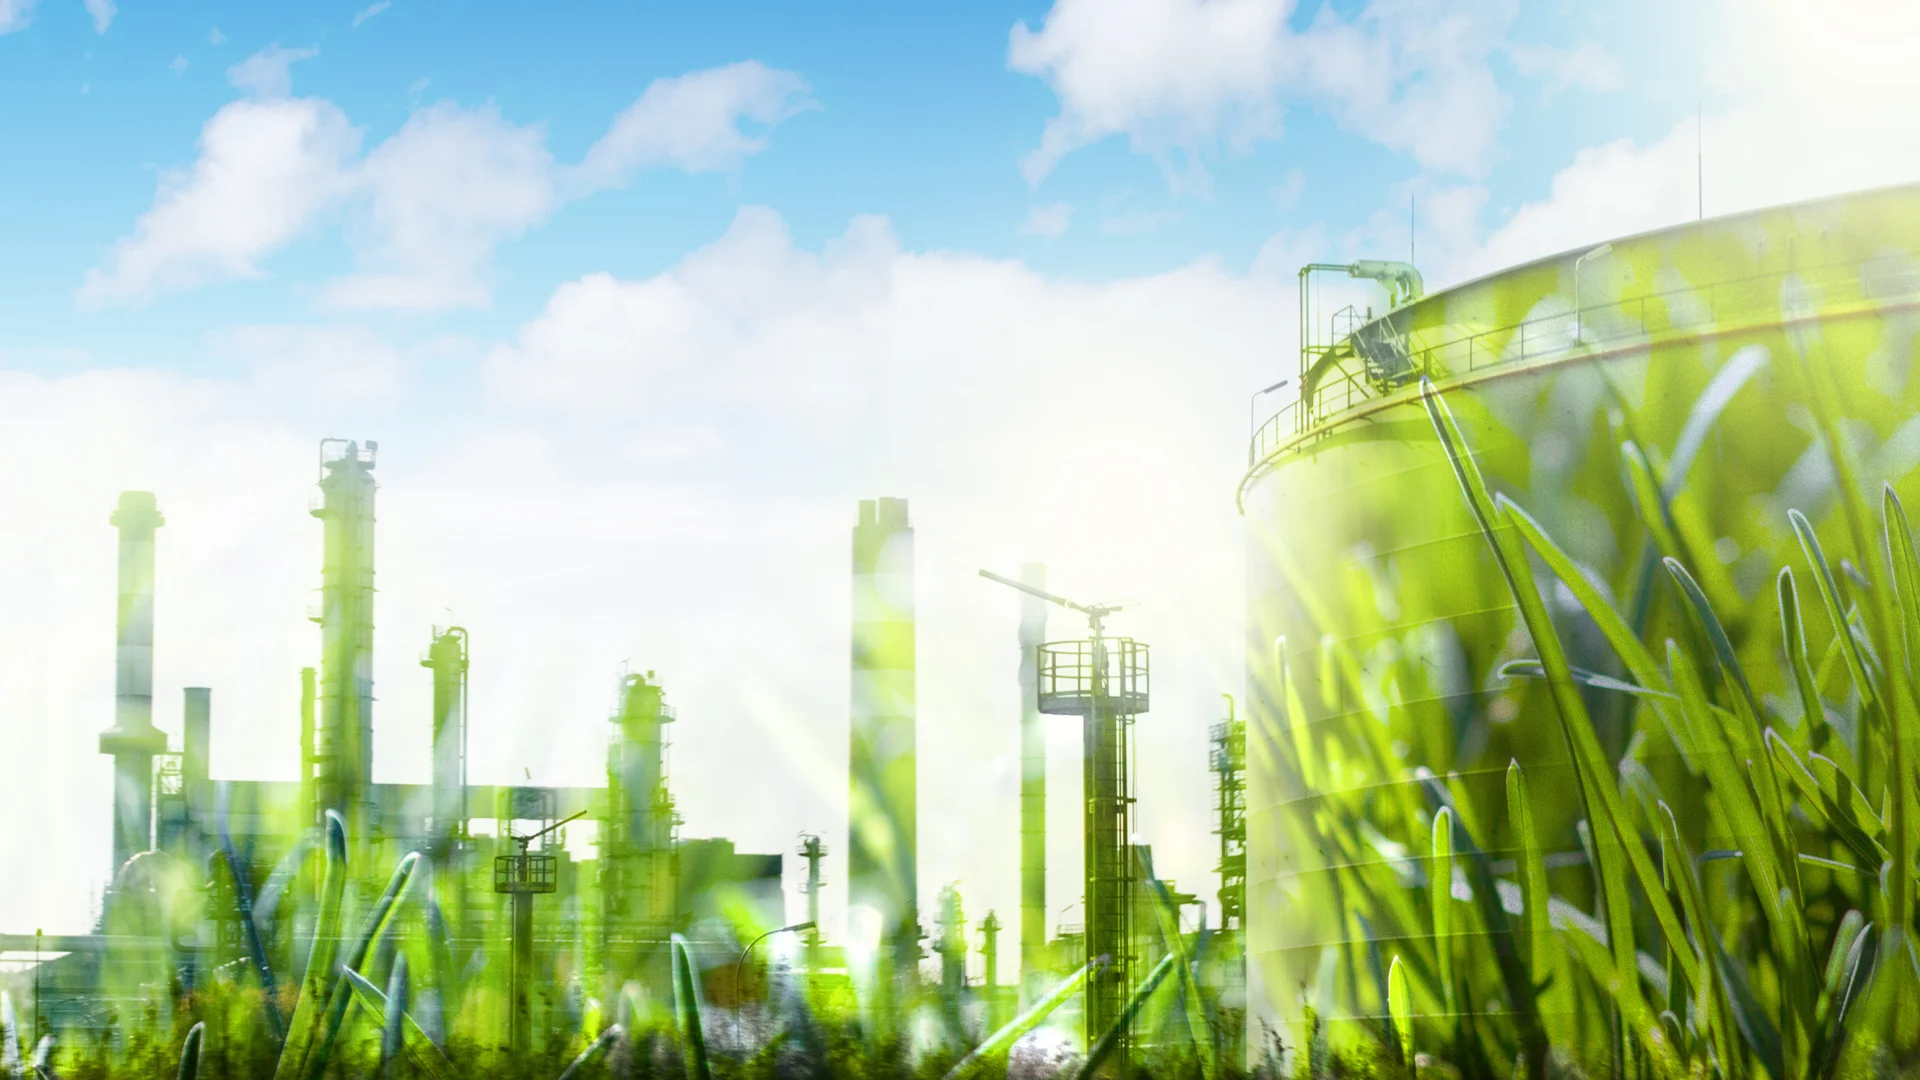 A factory silhouette decorated by green grass with a blue sky in the background.